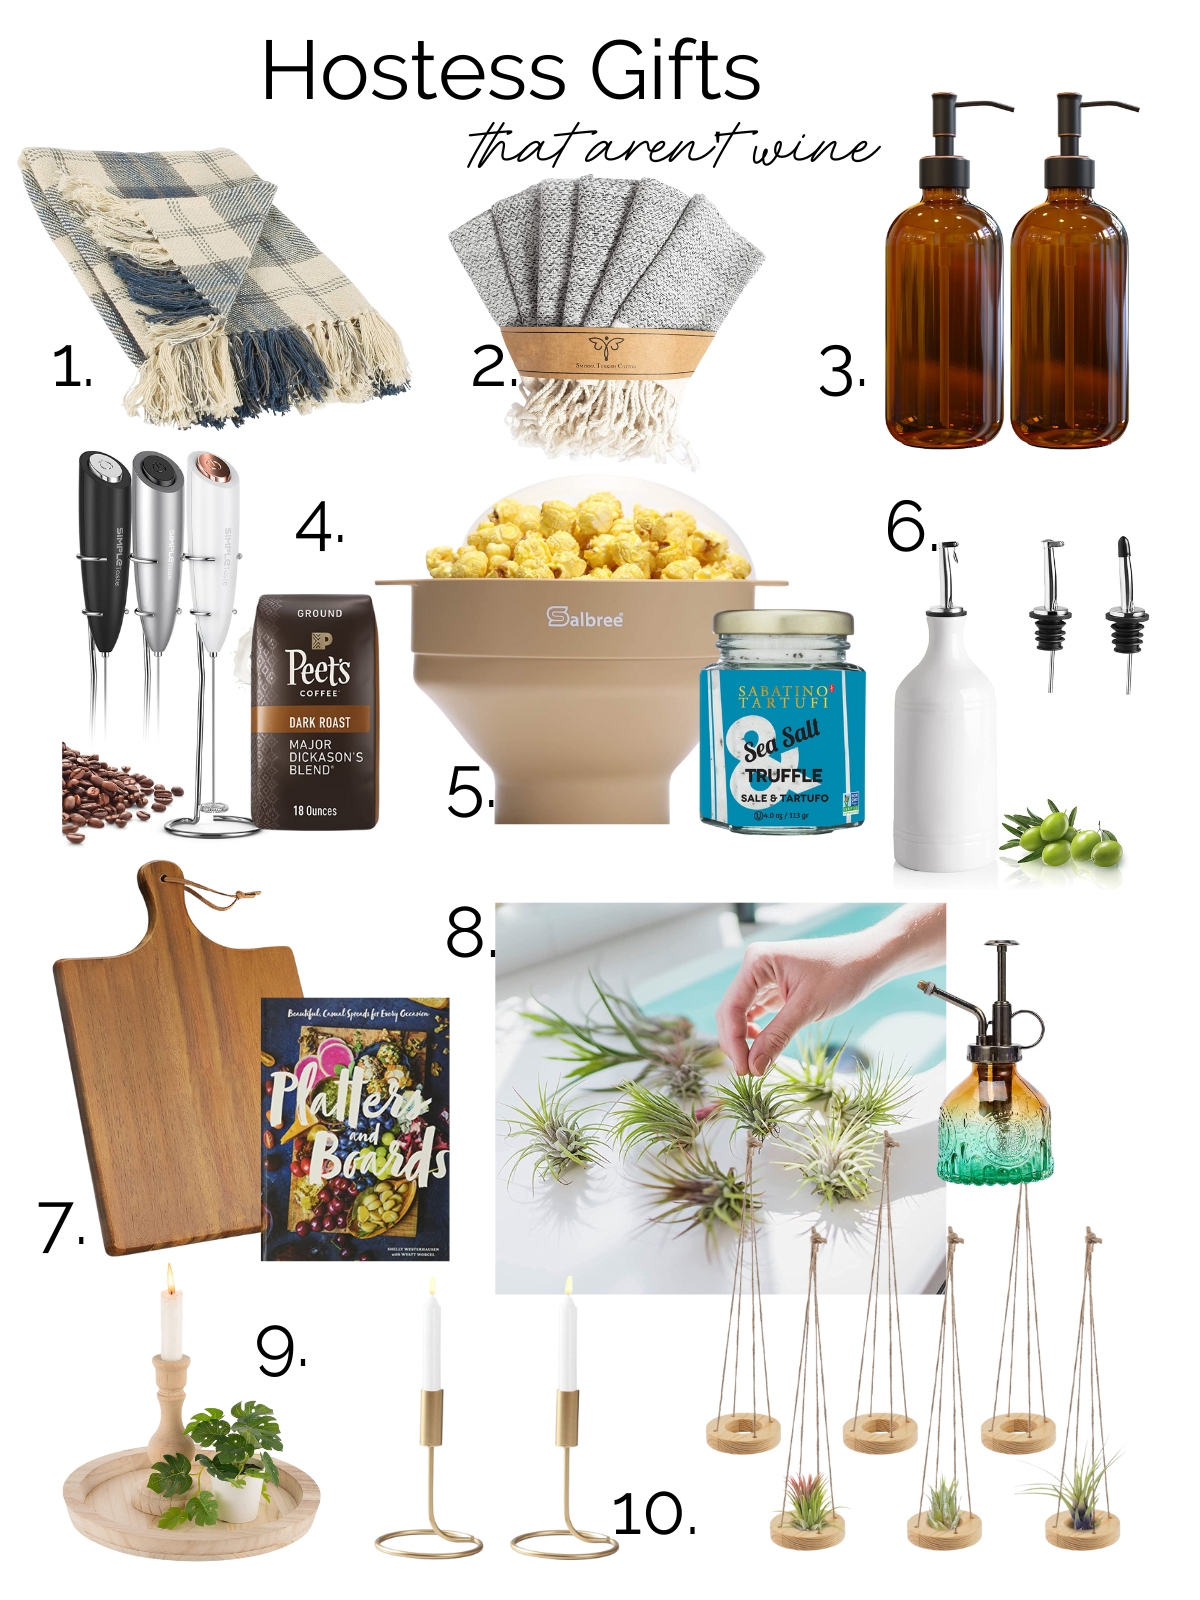 Food Hunter's Guide to Cuisine: A Gift Guide For The Food & Beverage Lover  On Your List